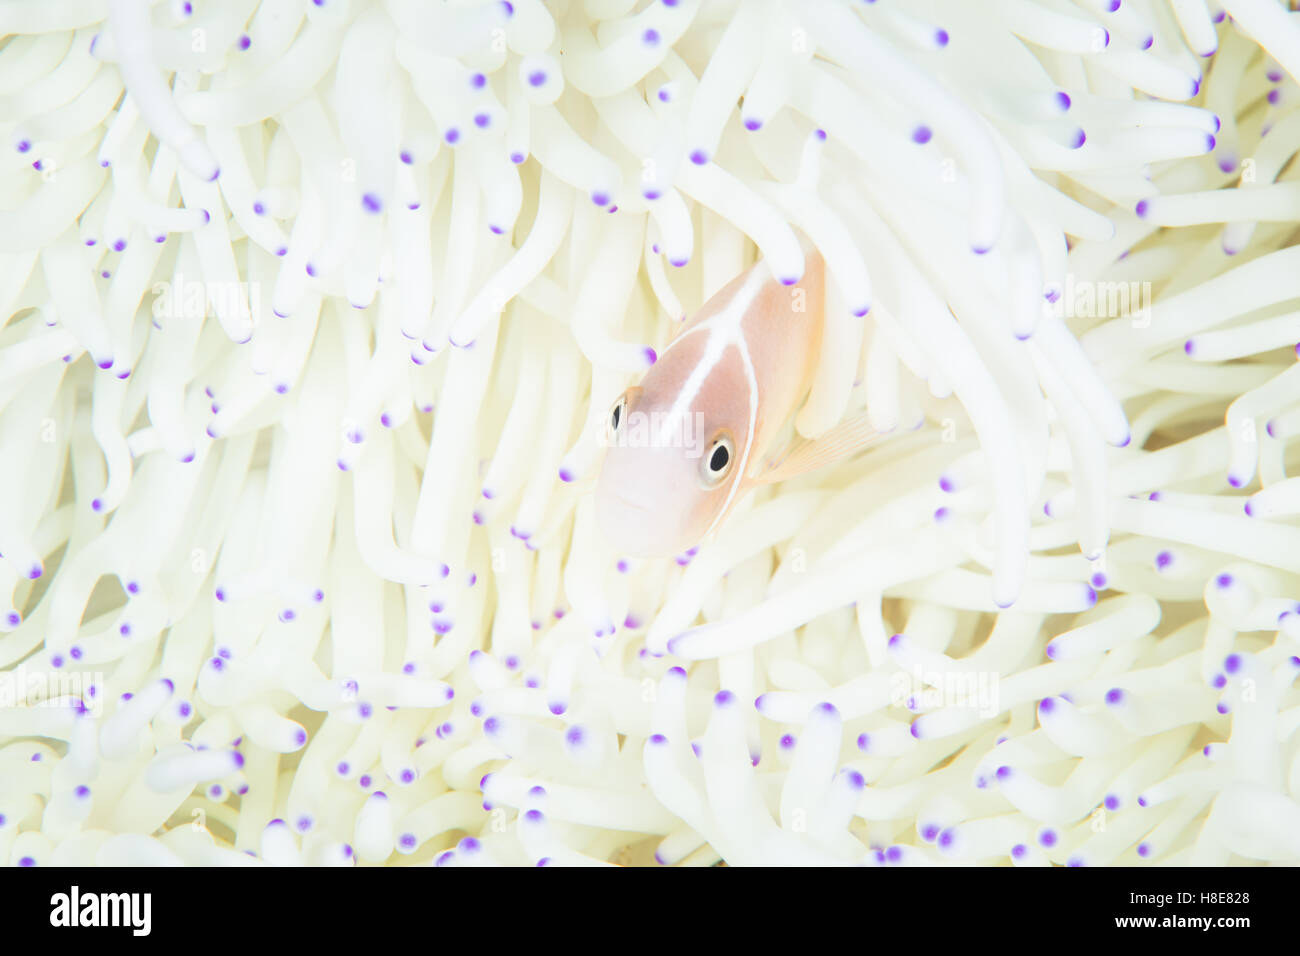 A Pink anemonefish (Amphiprion perideraion) swims among the bleached tentacles of its host anemone on a coral reef in Indonesia. Stock Photo